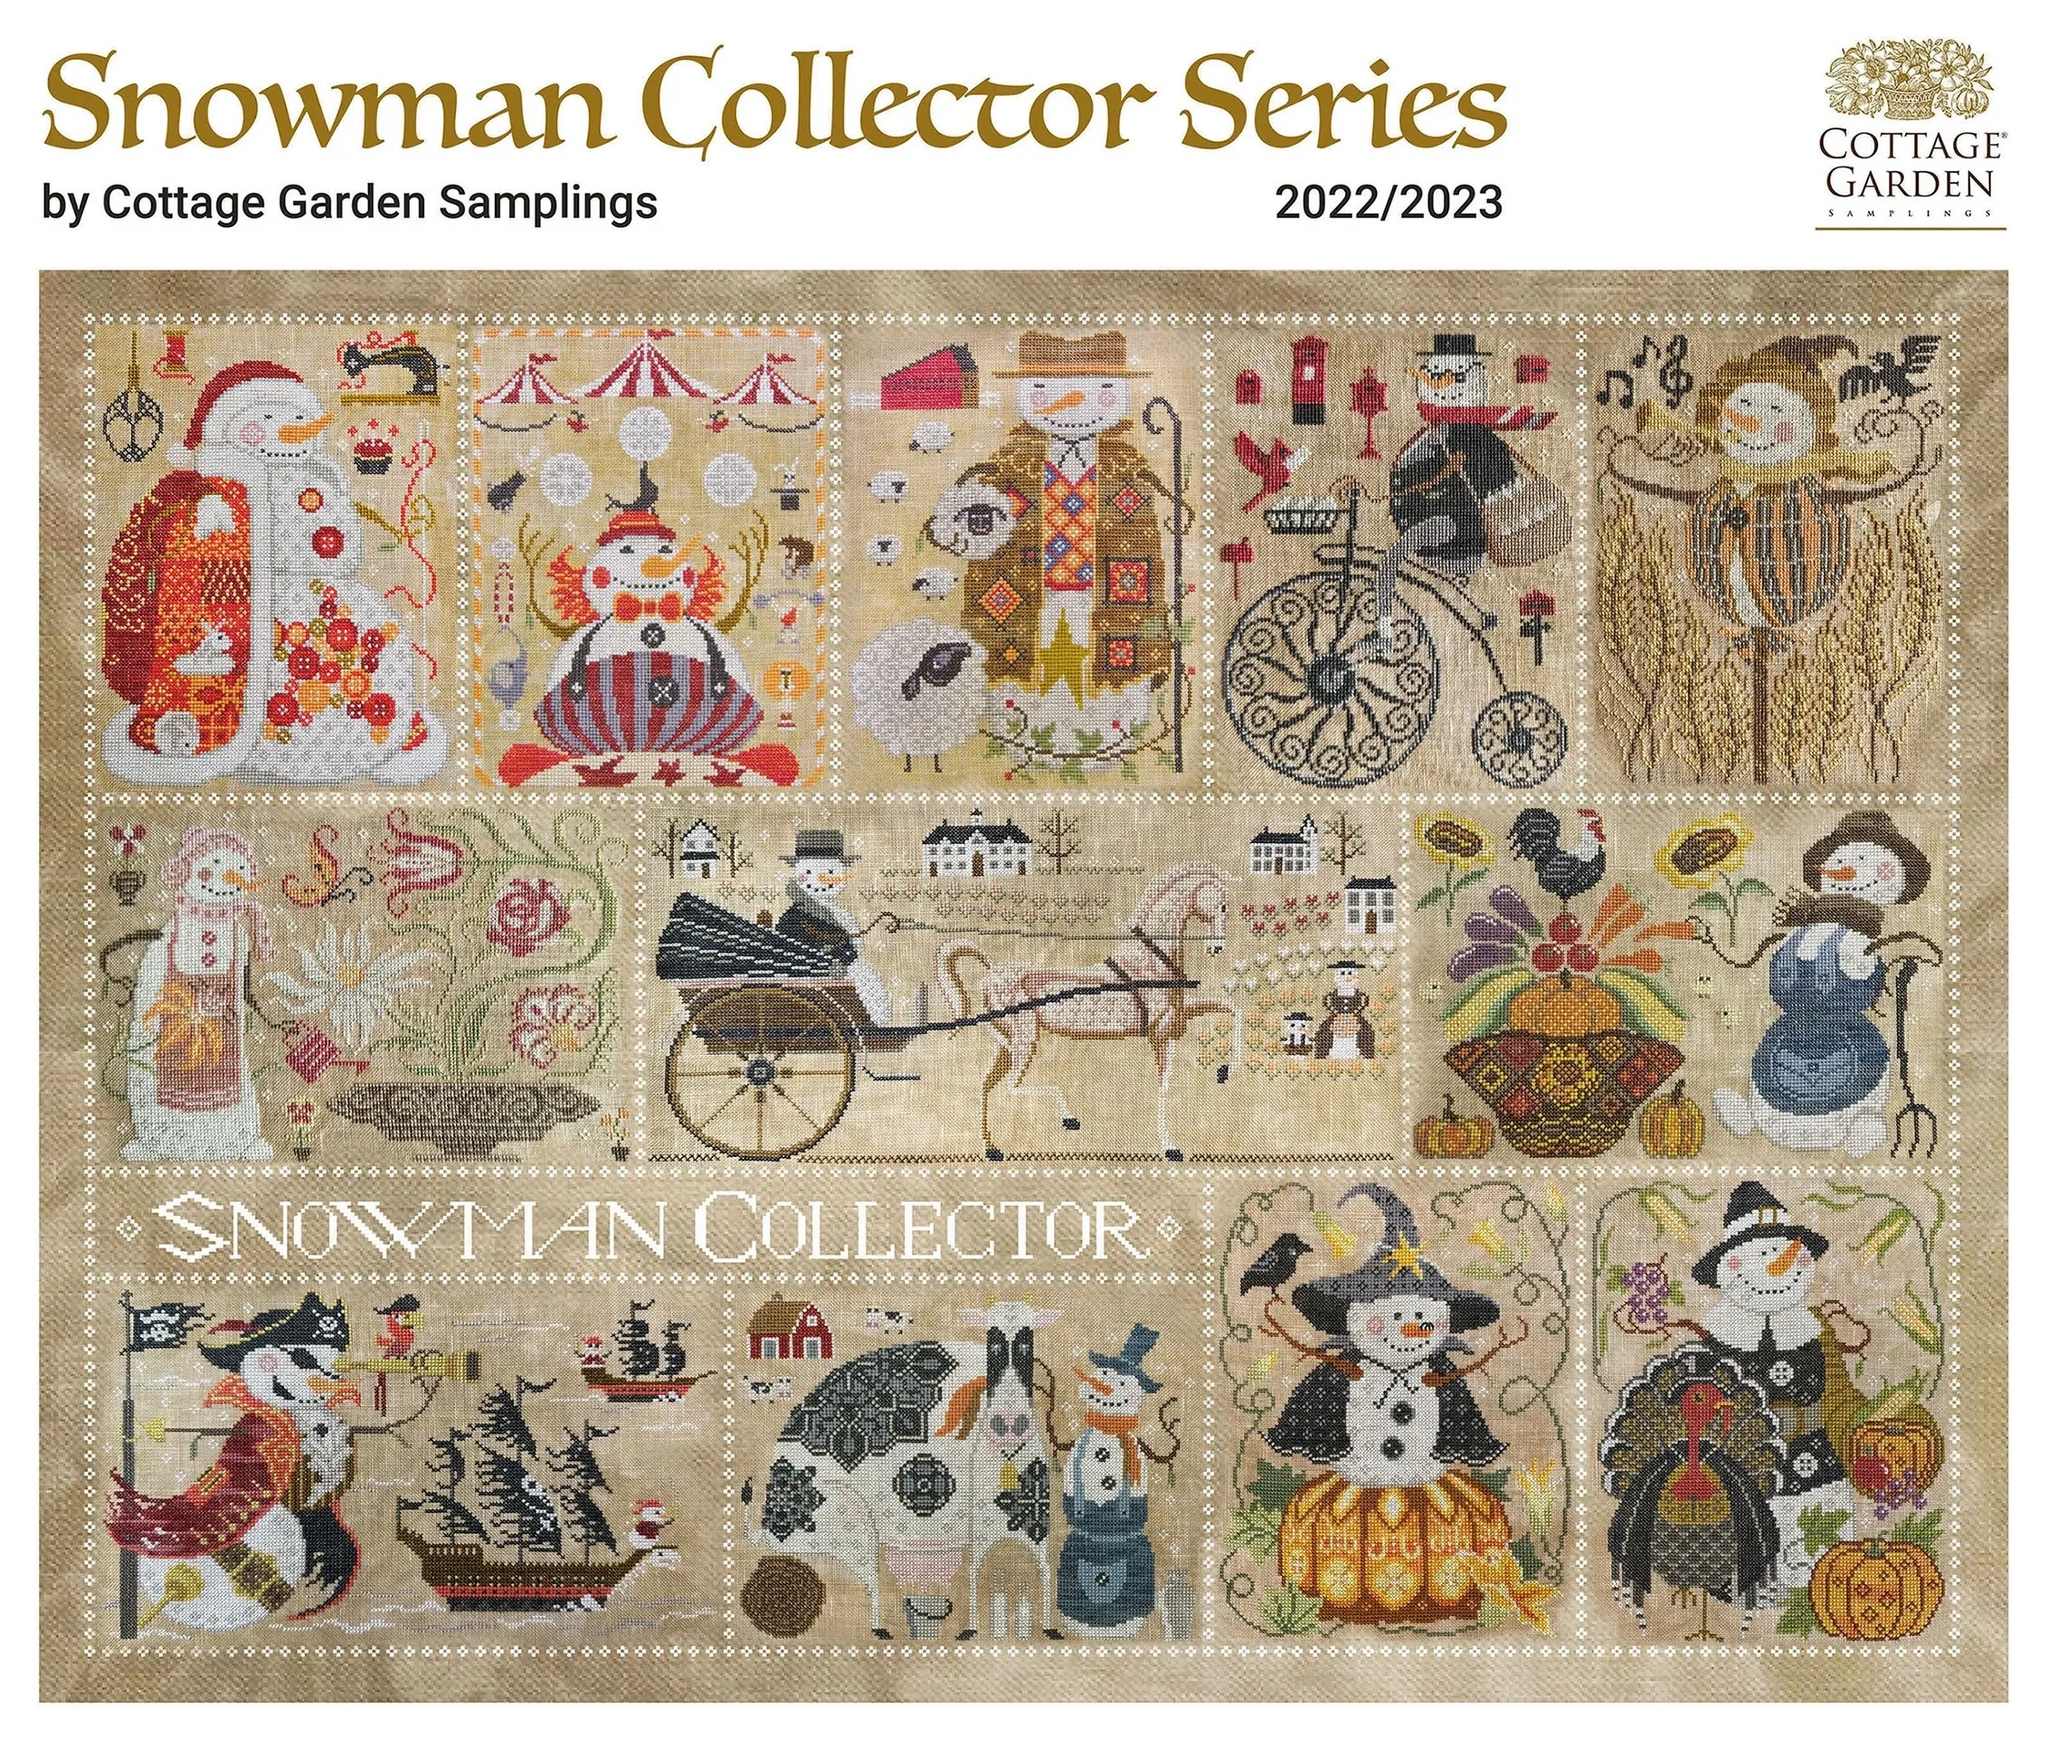 The Needleworker (1/12) - Snowman Collector series